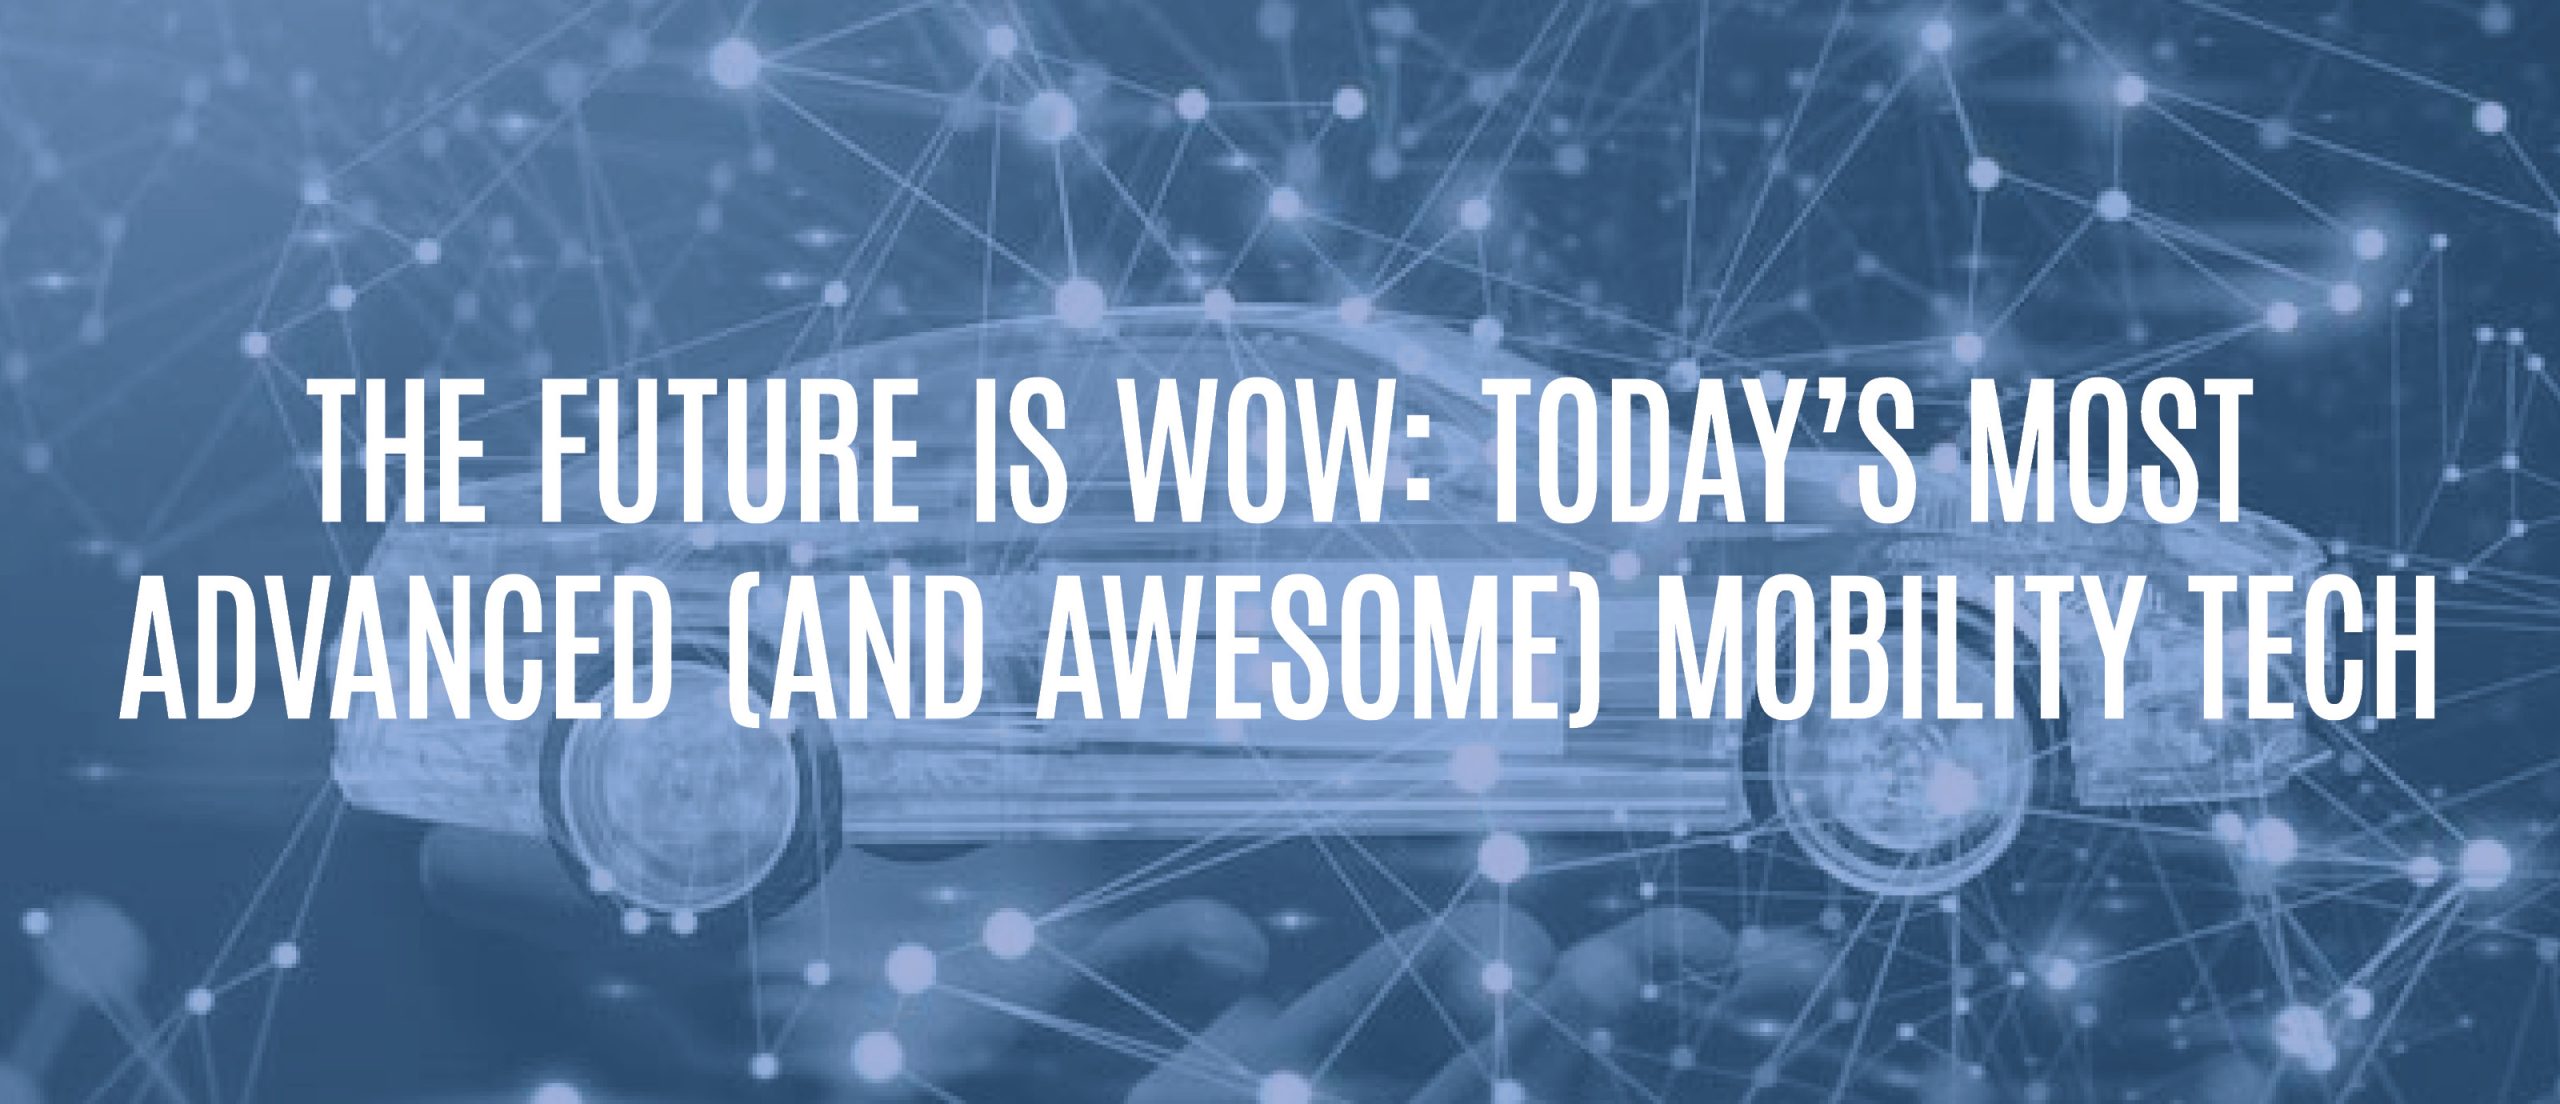 Blog Title - The future is wow: today's most advanced (and awesome) mobility tech